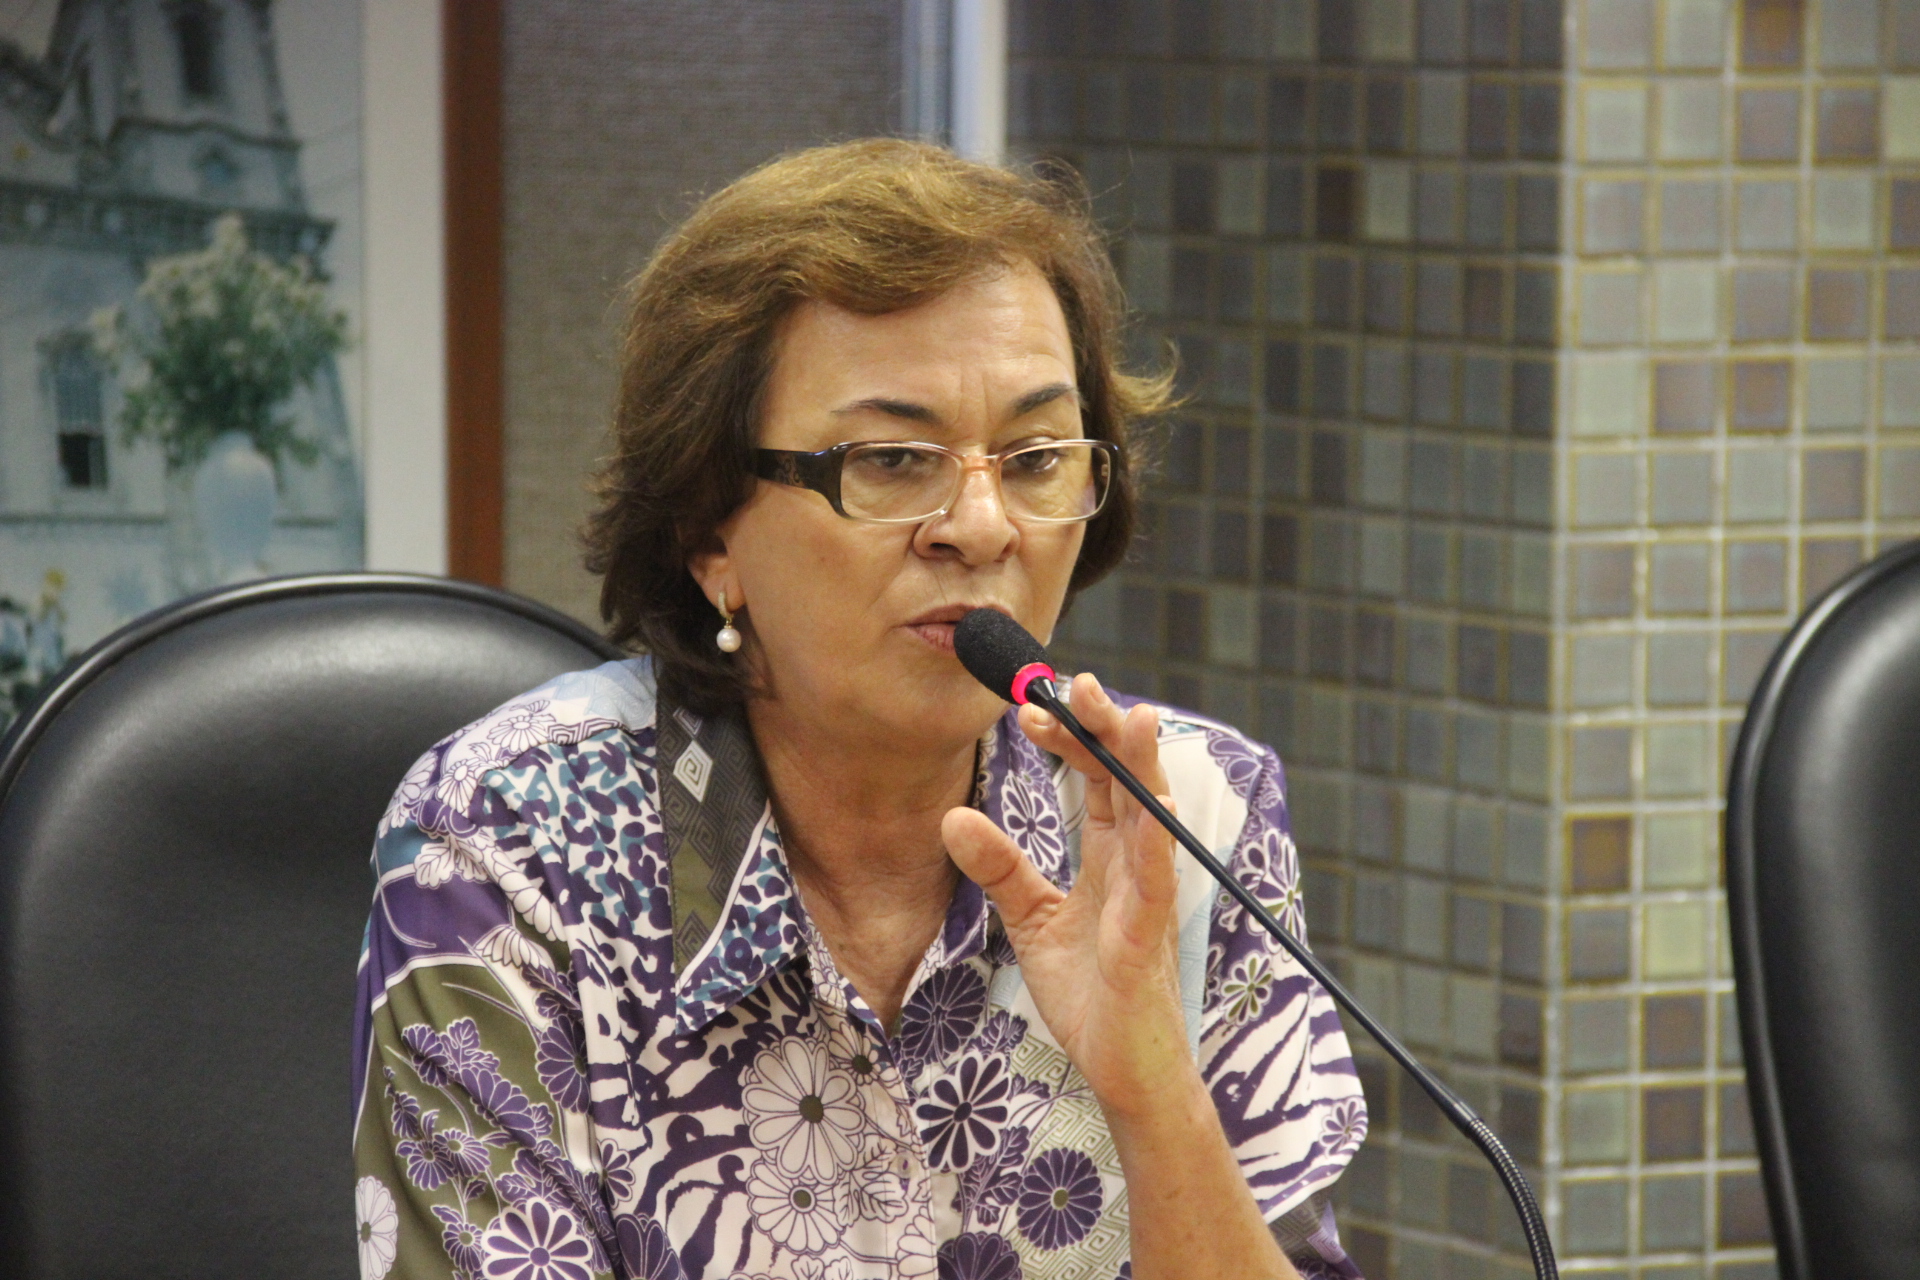 a woman wearing glasses speaking into a microphone